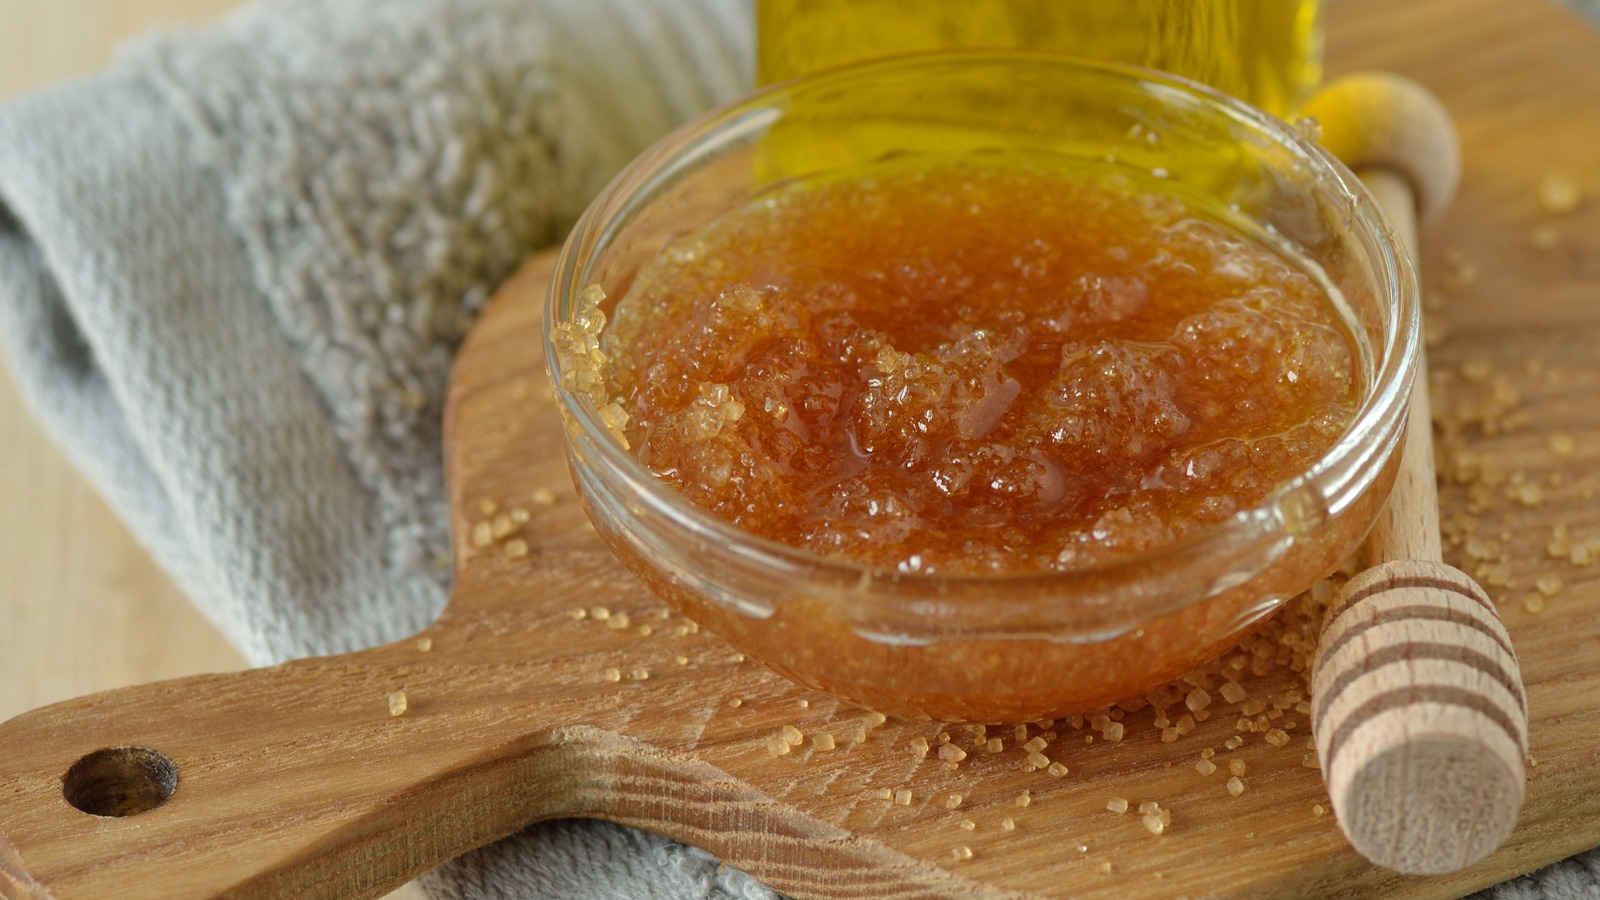 How To Correctly Use Sugar Scrubs On Your Skin